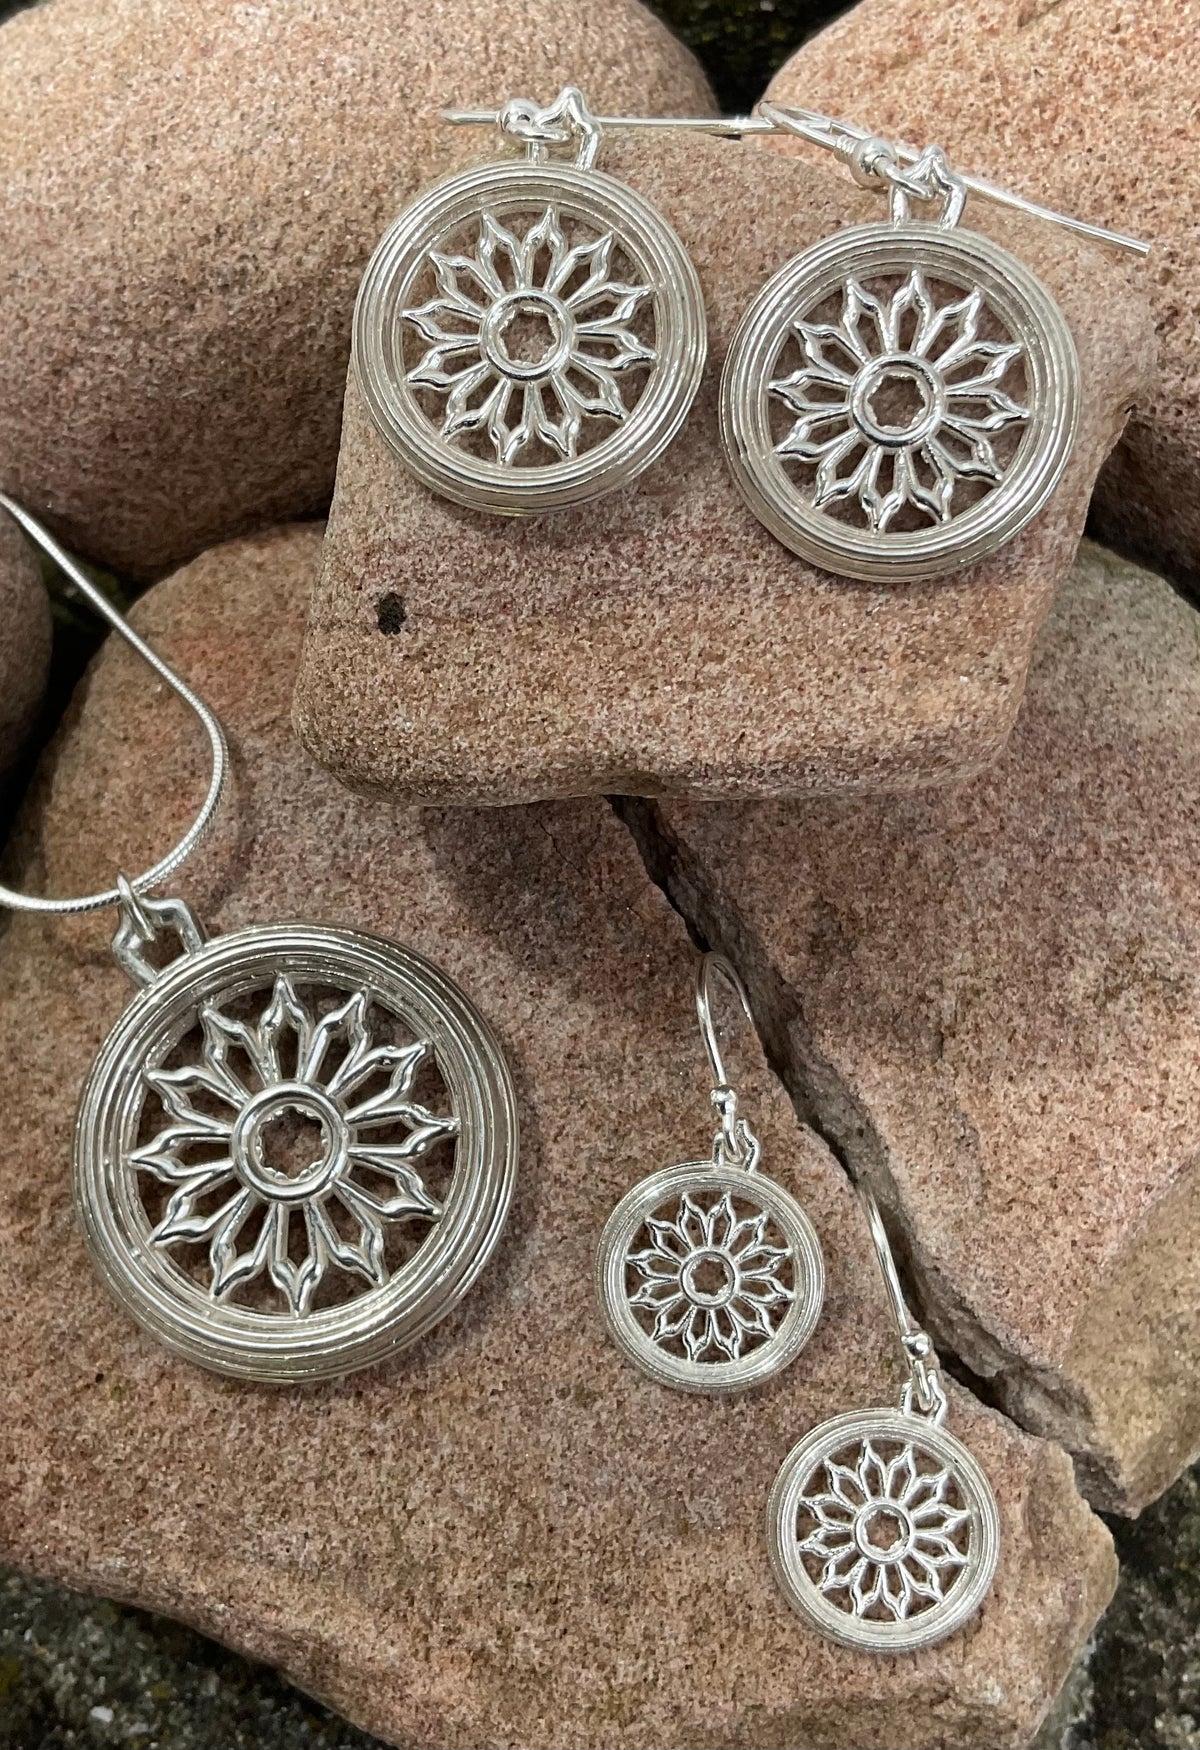 St Magnus Cathedral Rose window earrings